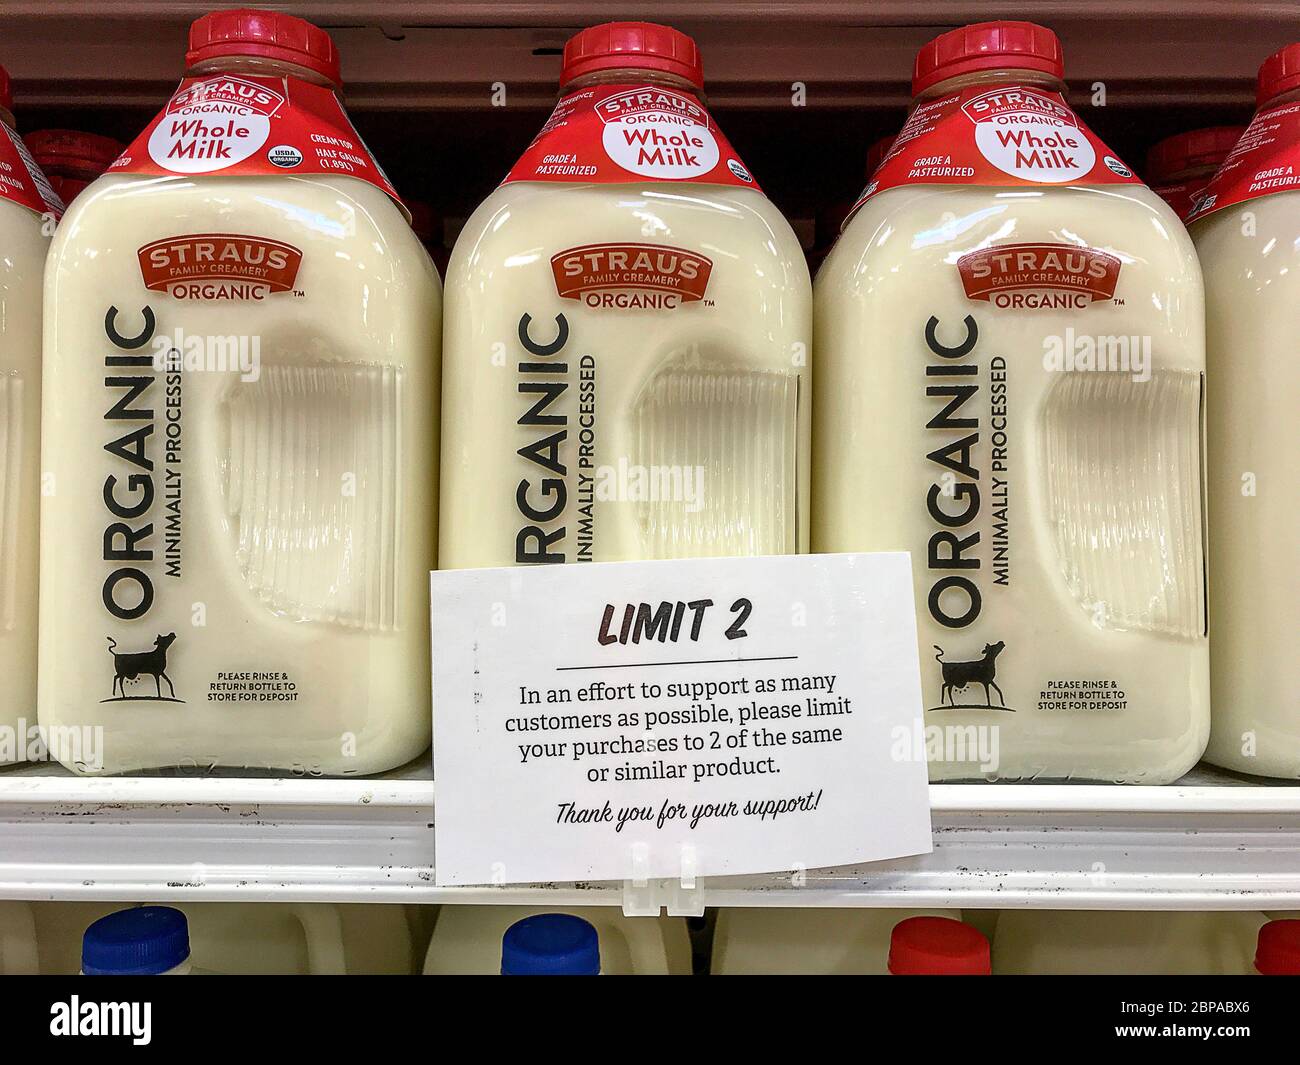 Sign informing customers that store places purchasing limits on dairy products to prevent food hoarding during coronavirus outbreak - San Jose, Califo Stock Photo